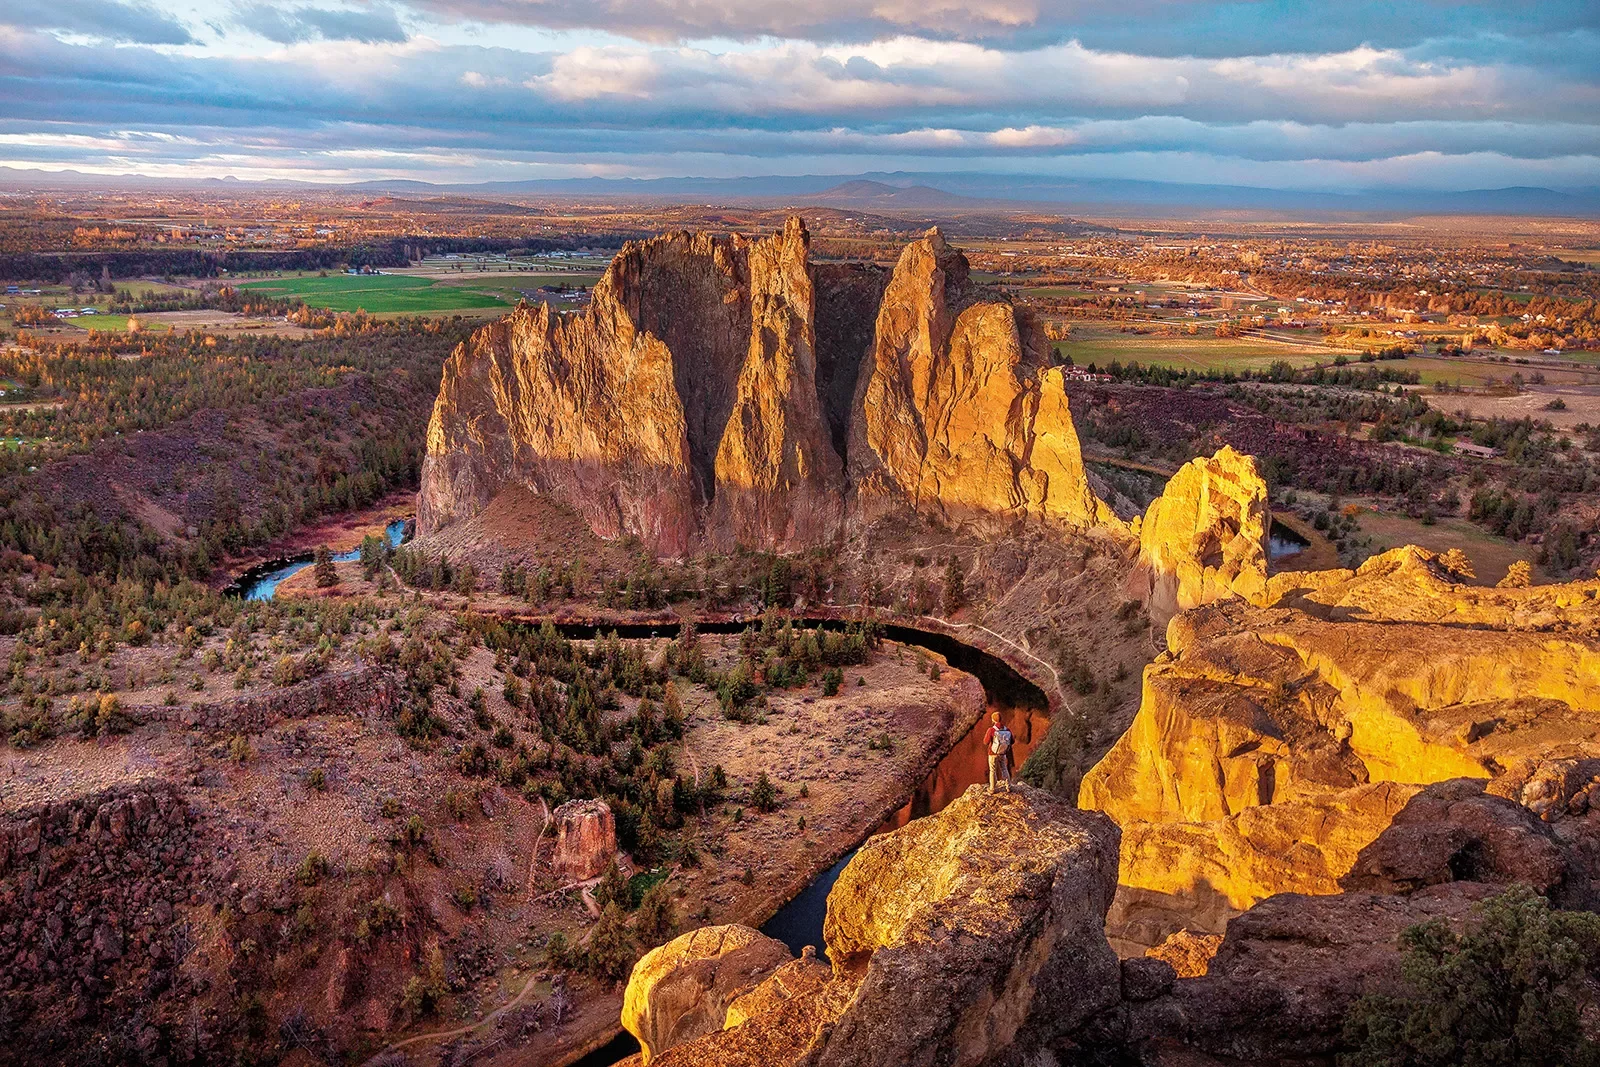 Wide shot of Smith Rock State Park, guest visible in foreground.